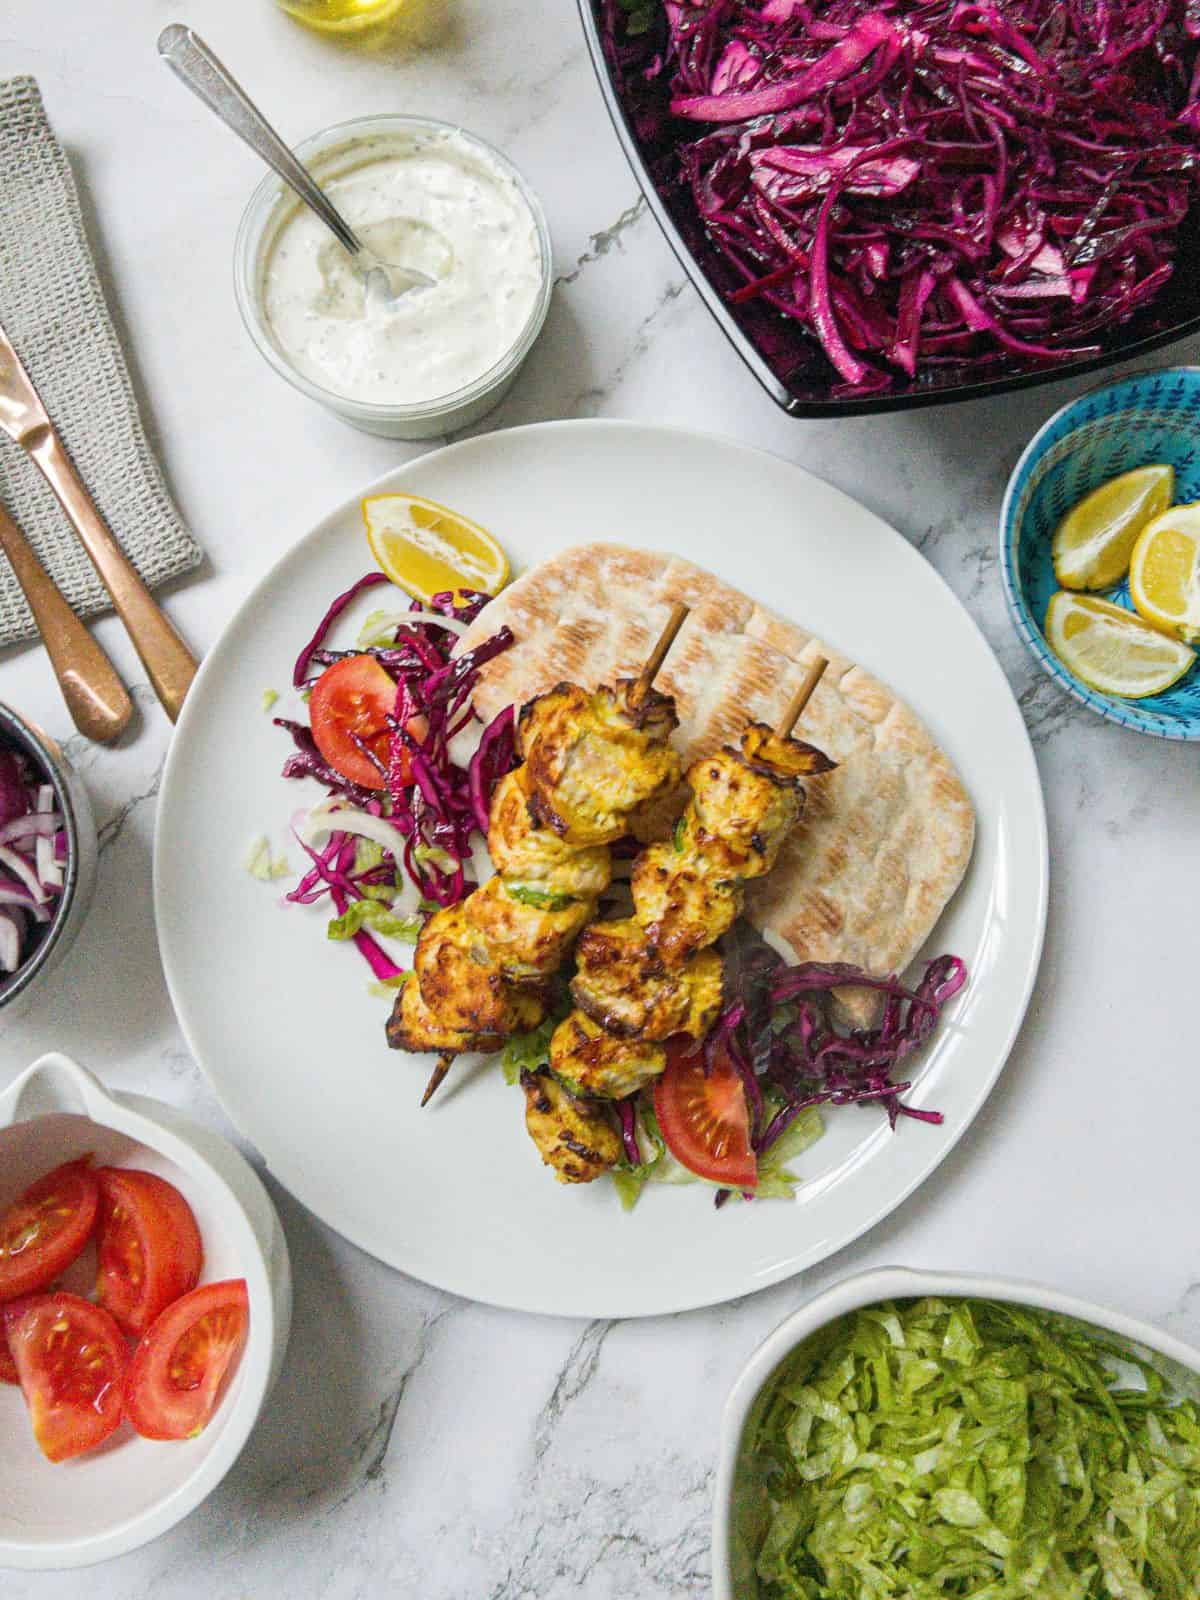 Two chicken shish kebabs on sticks laying on top of salad and pitta bread on a white plate. With a bowl of red cabbage, a pot of garlic sauce, some lemon wedges, tomatoes and lettuce in the background.